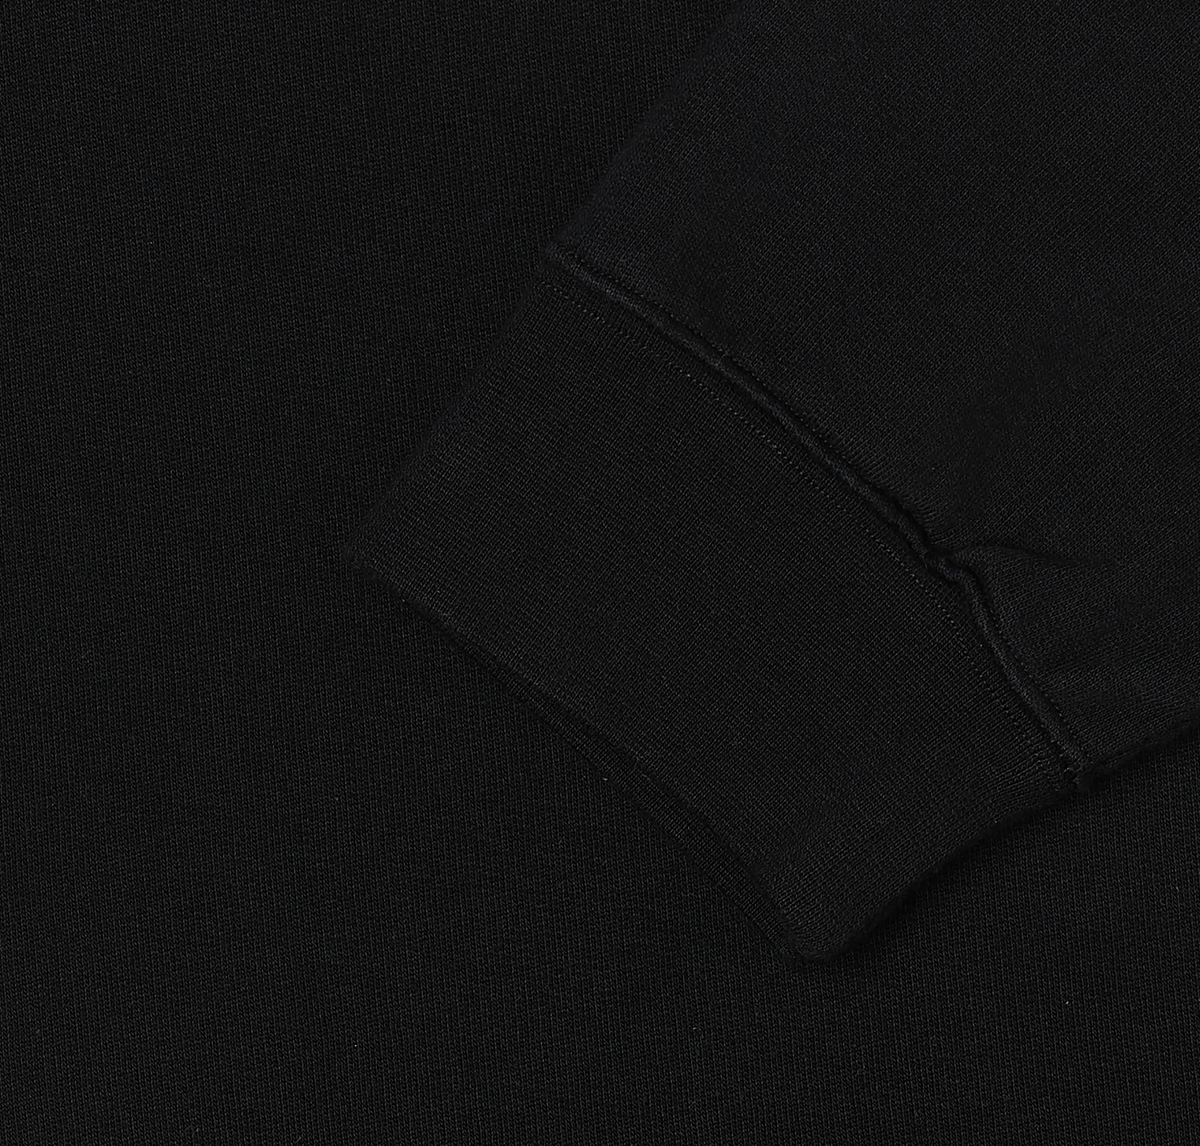 EDWIN x TEIDE - Panther Sweater - Black front detail